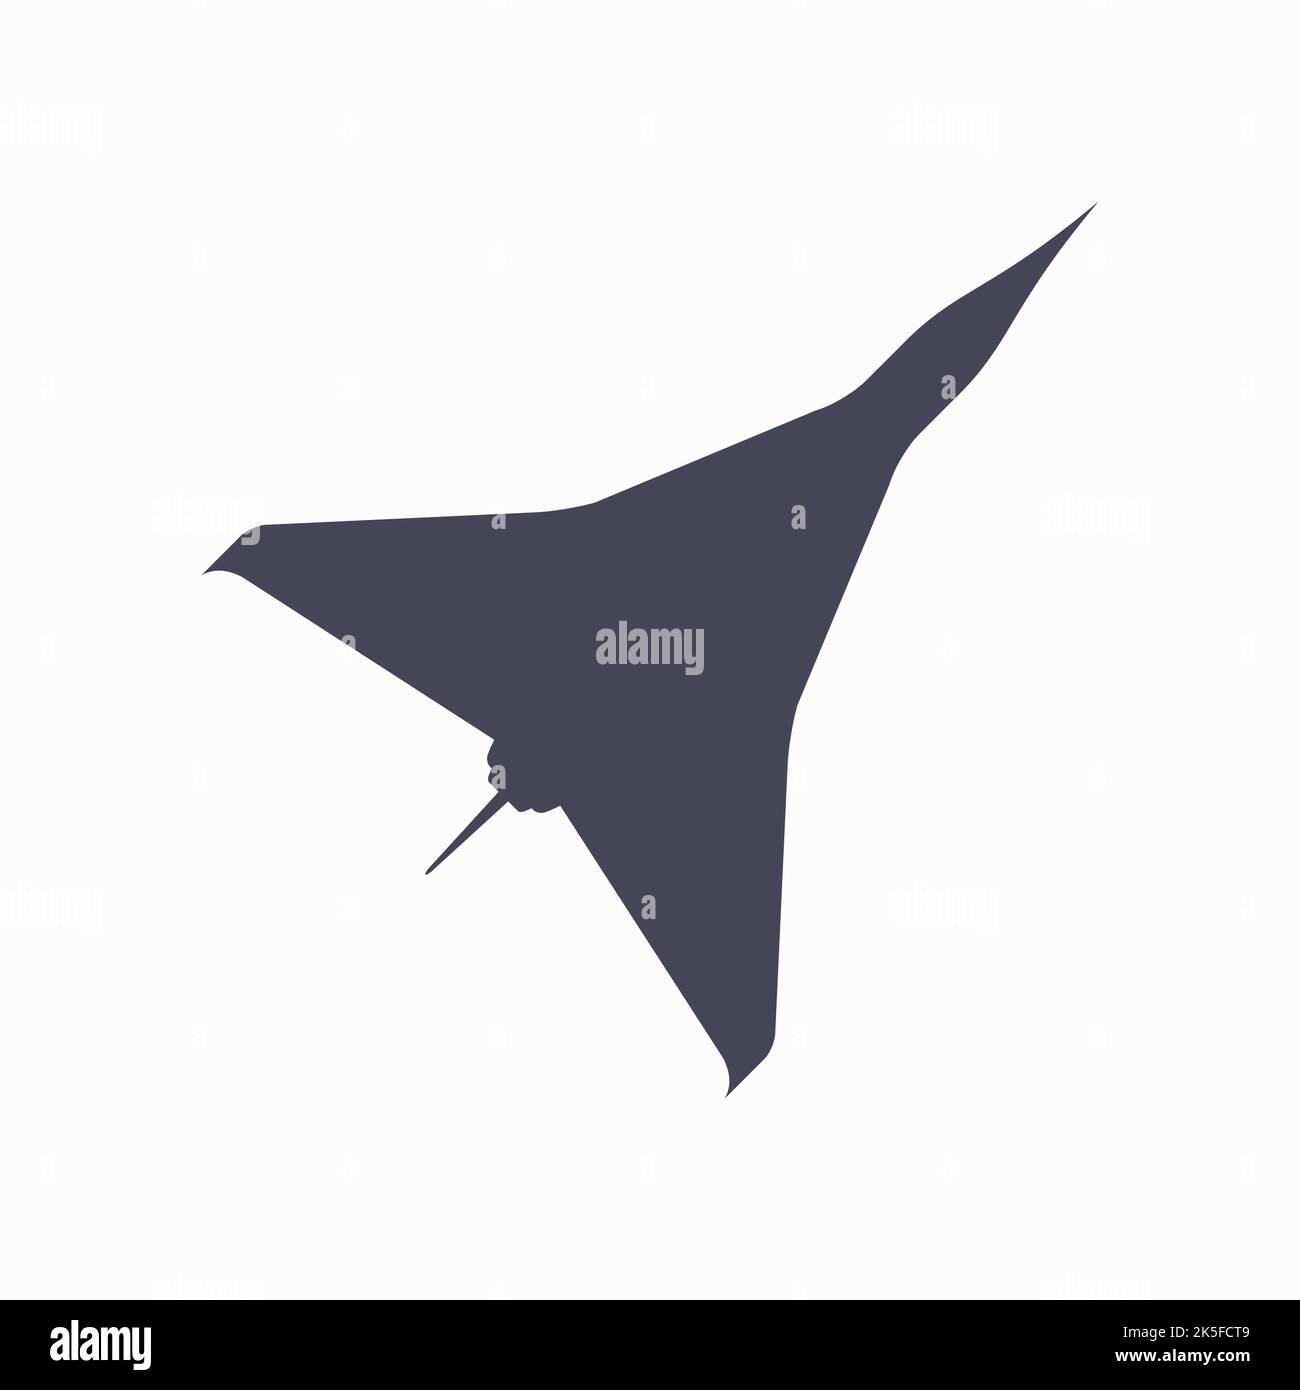 Supersonic Passenger Aircraft Silhouette Aircraft Top View Icon Flat